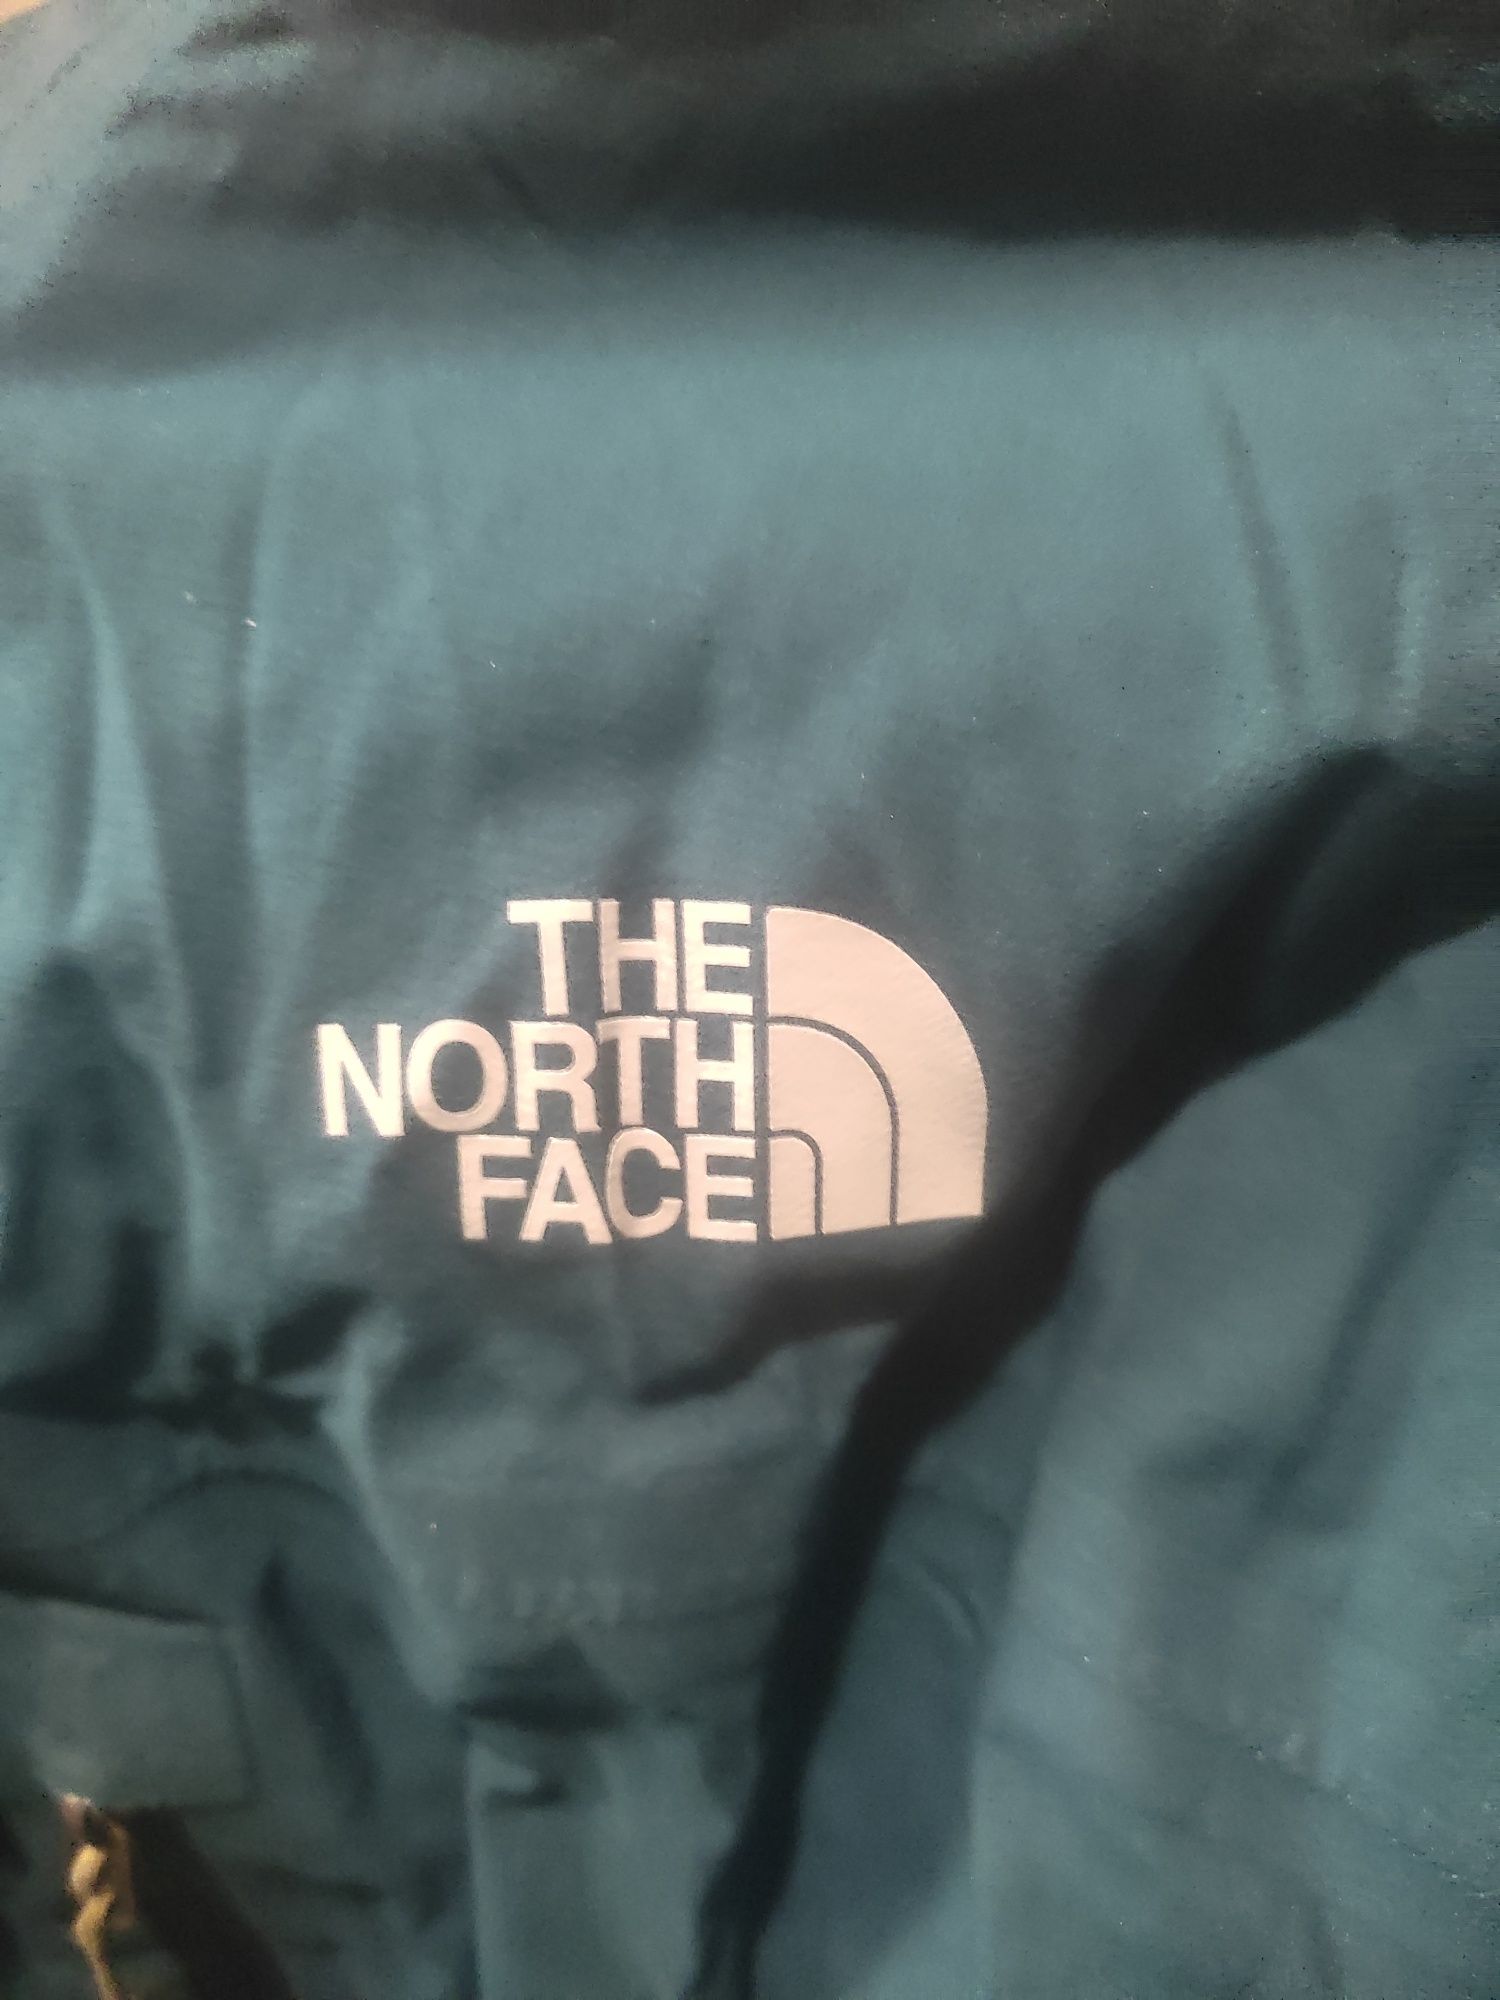 Куртка The north face